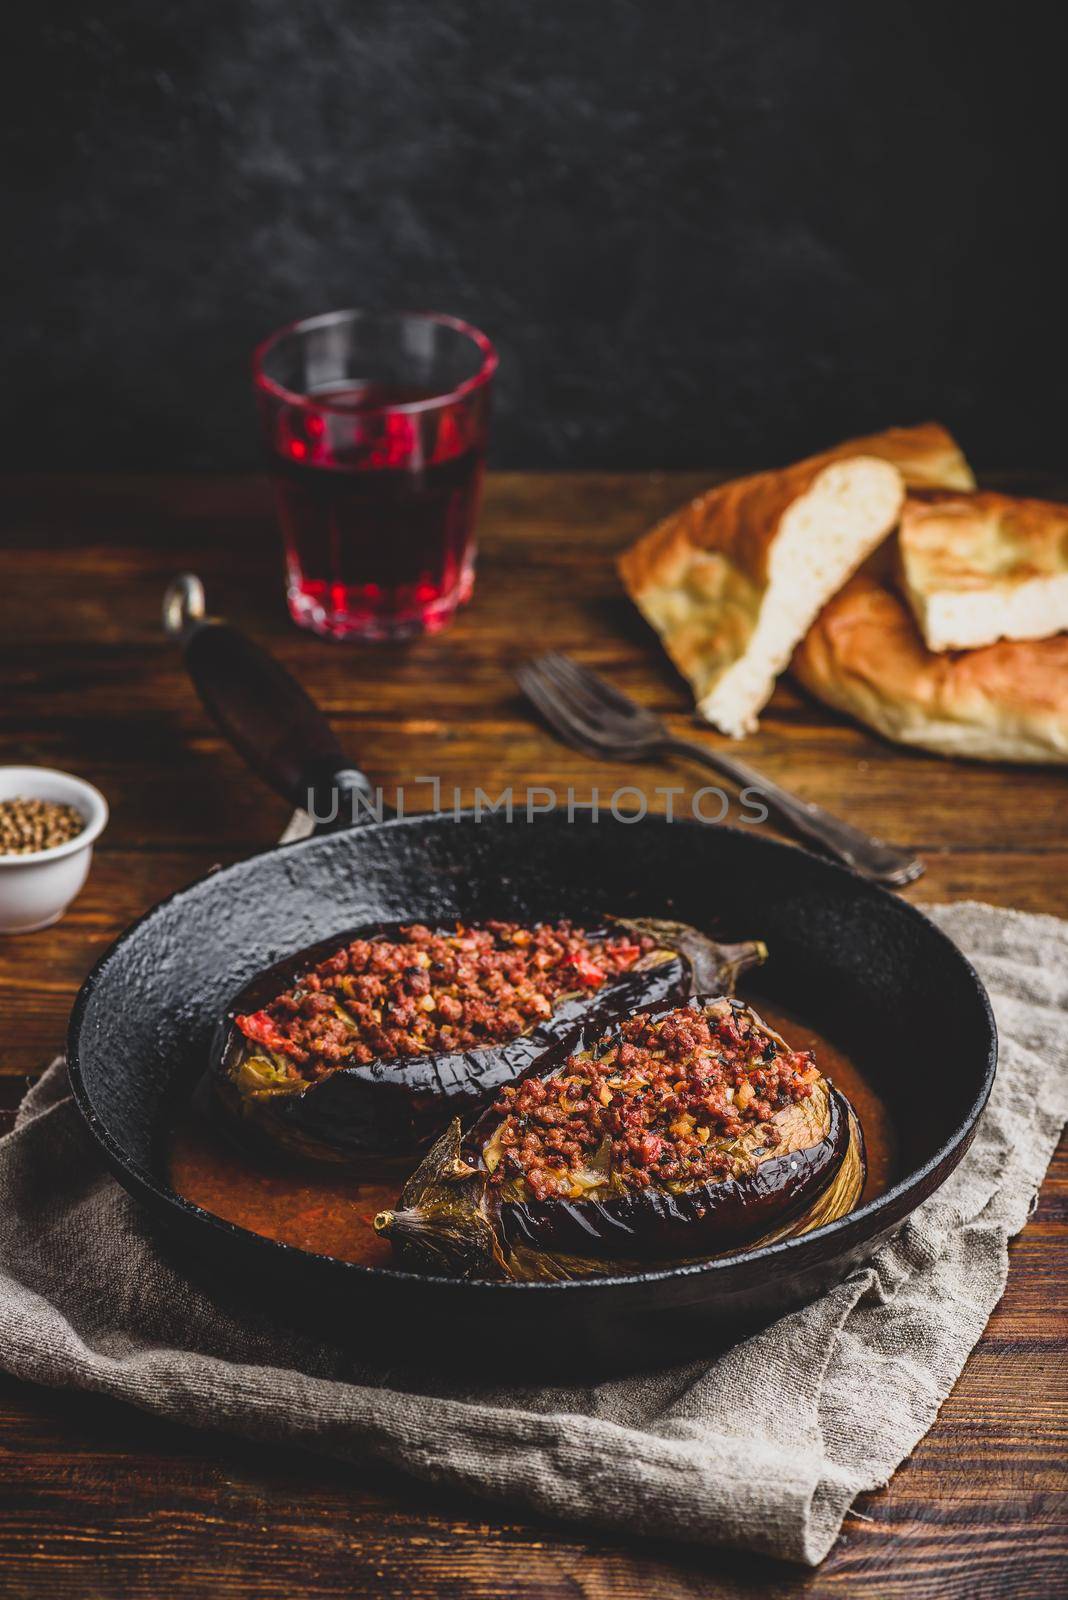 Eggplants stuffed with ground beef and tomatoes by Seva_blsv